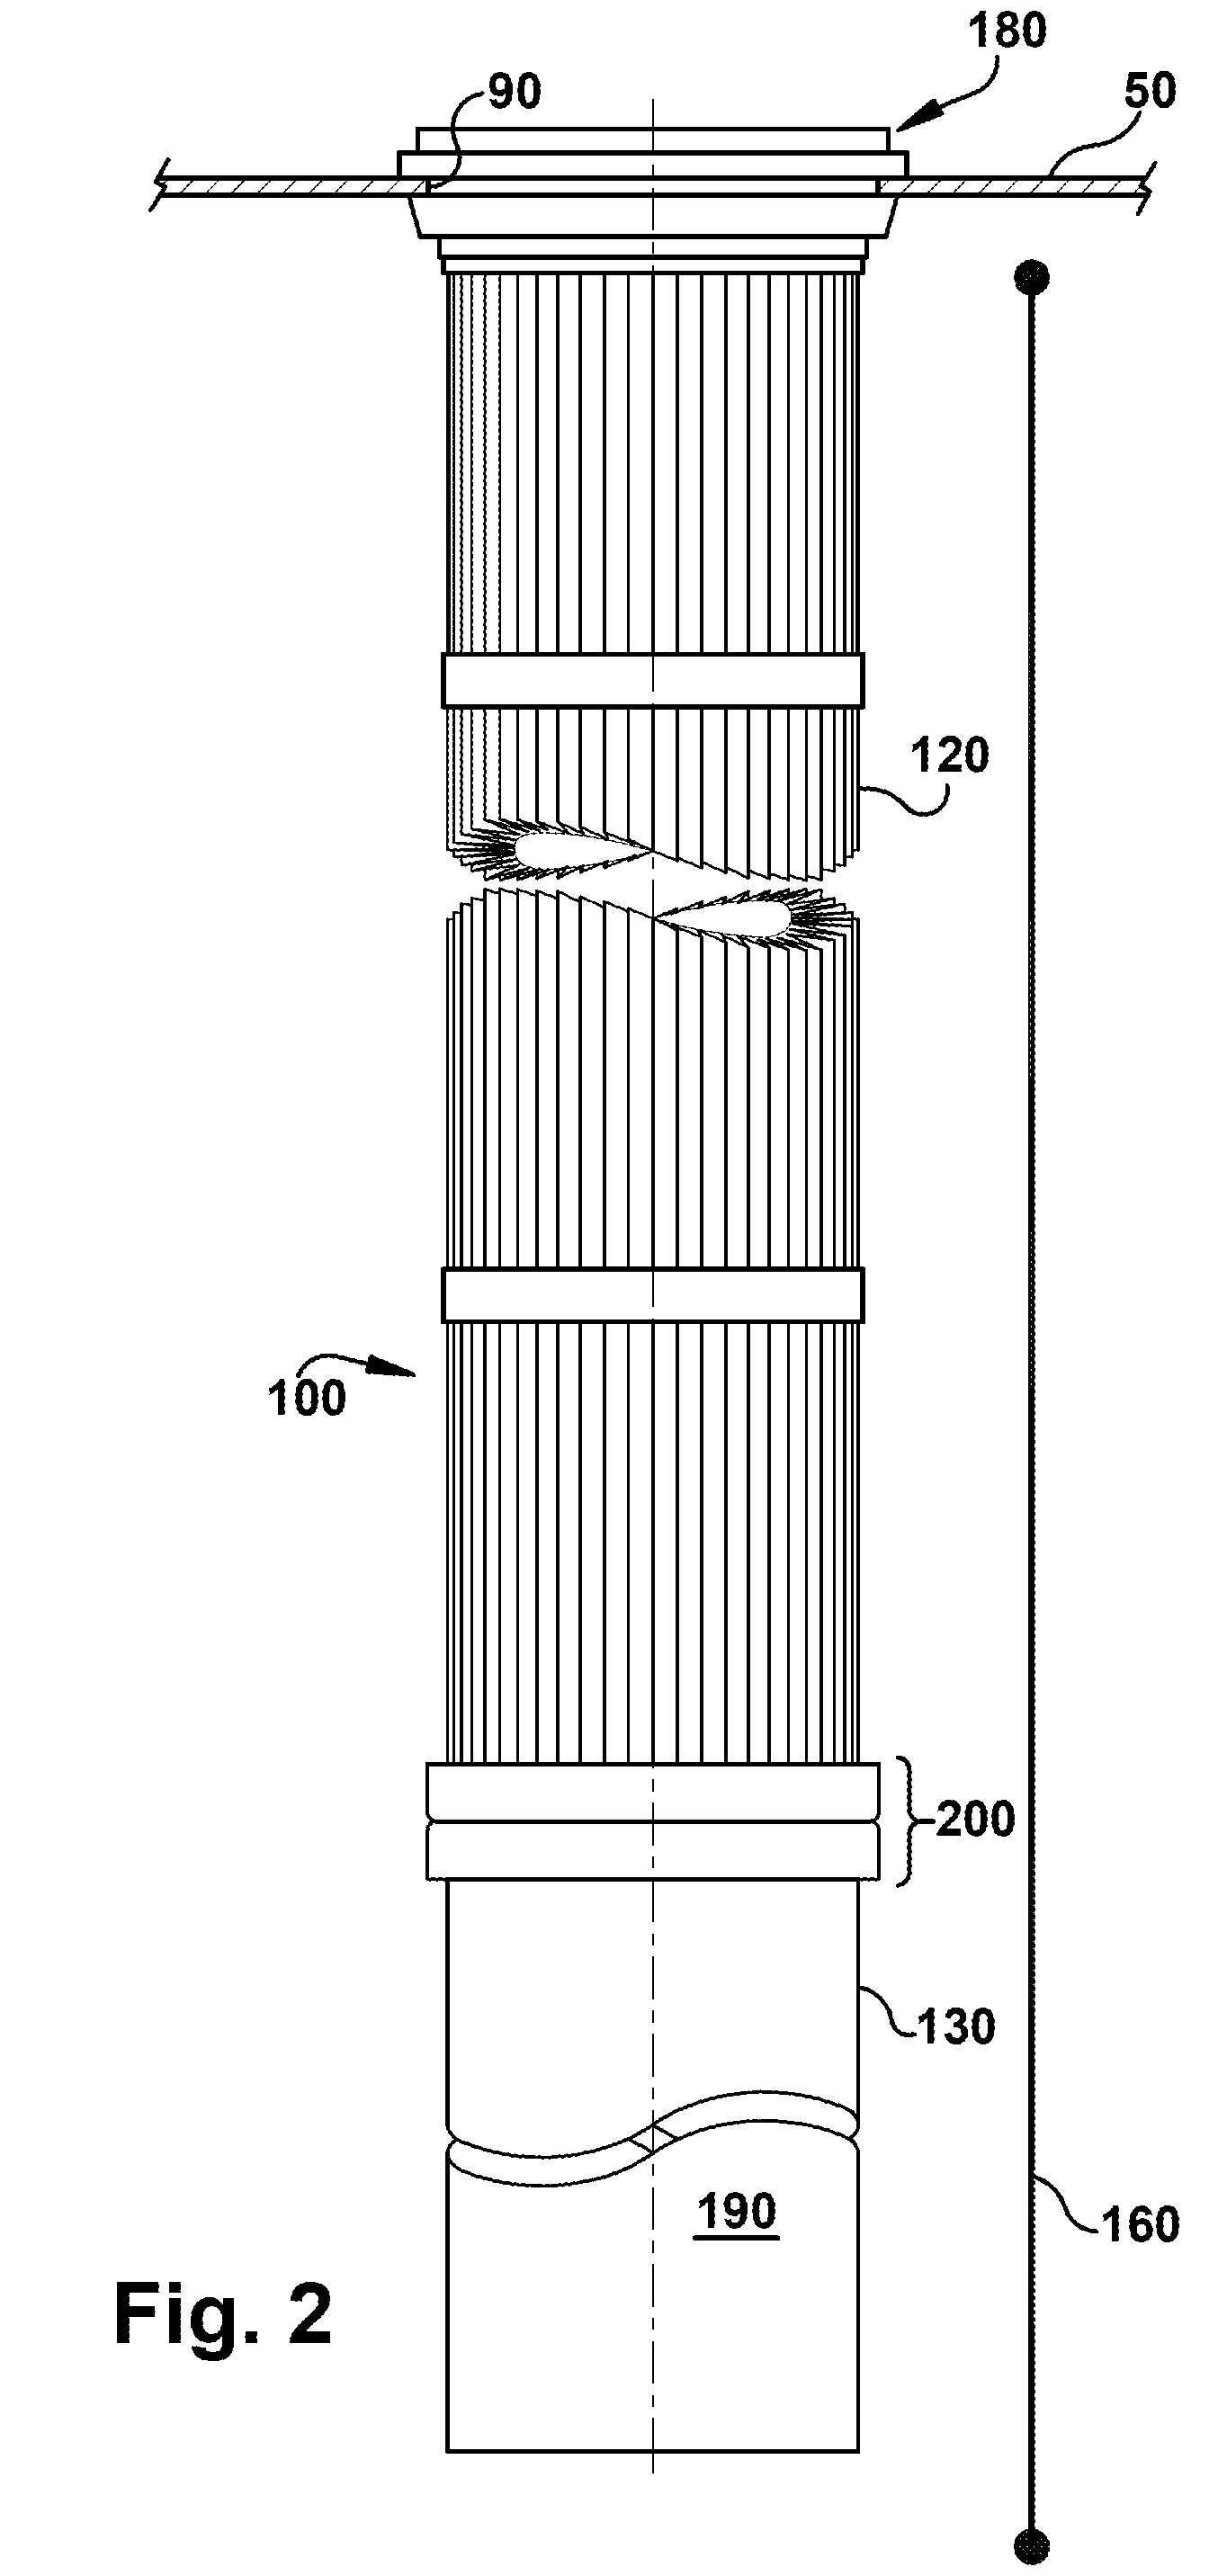 Methods for operating a filtration system